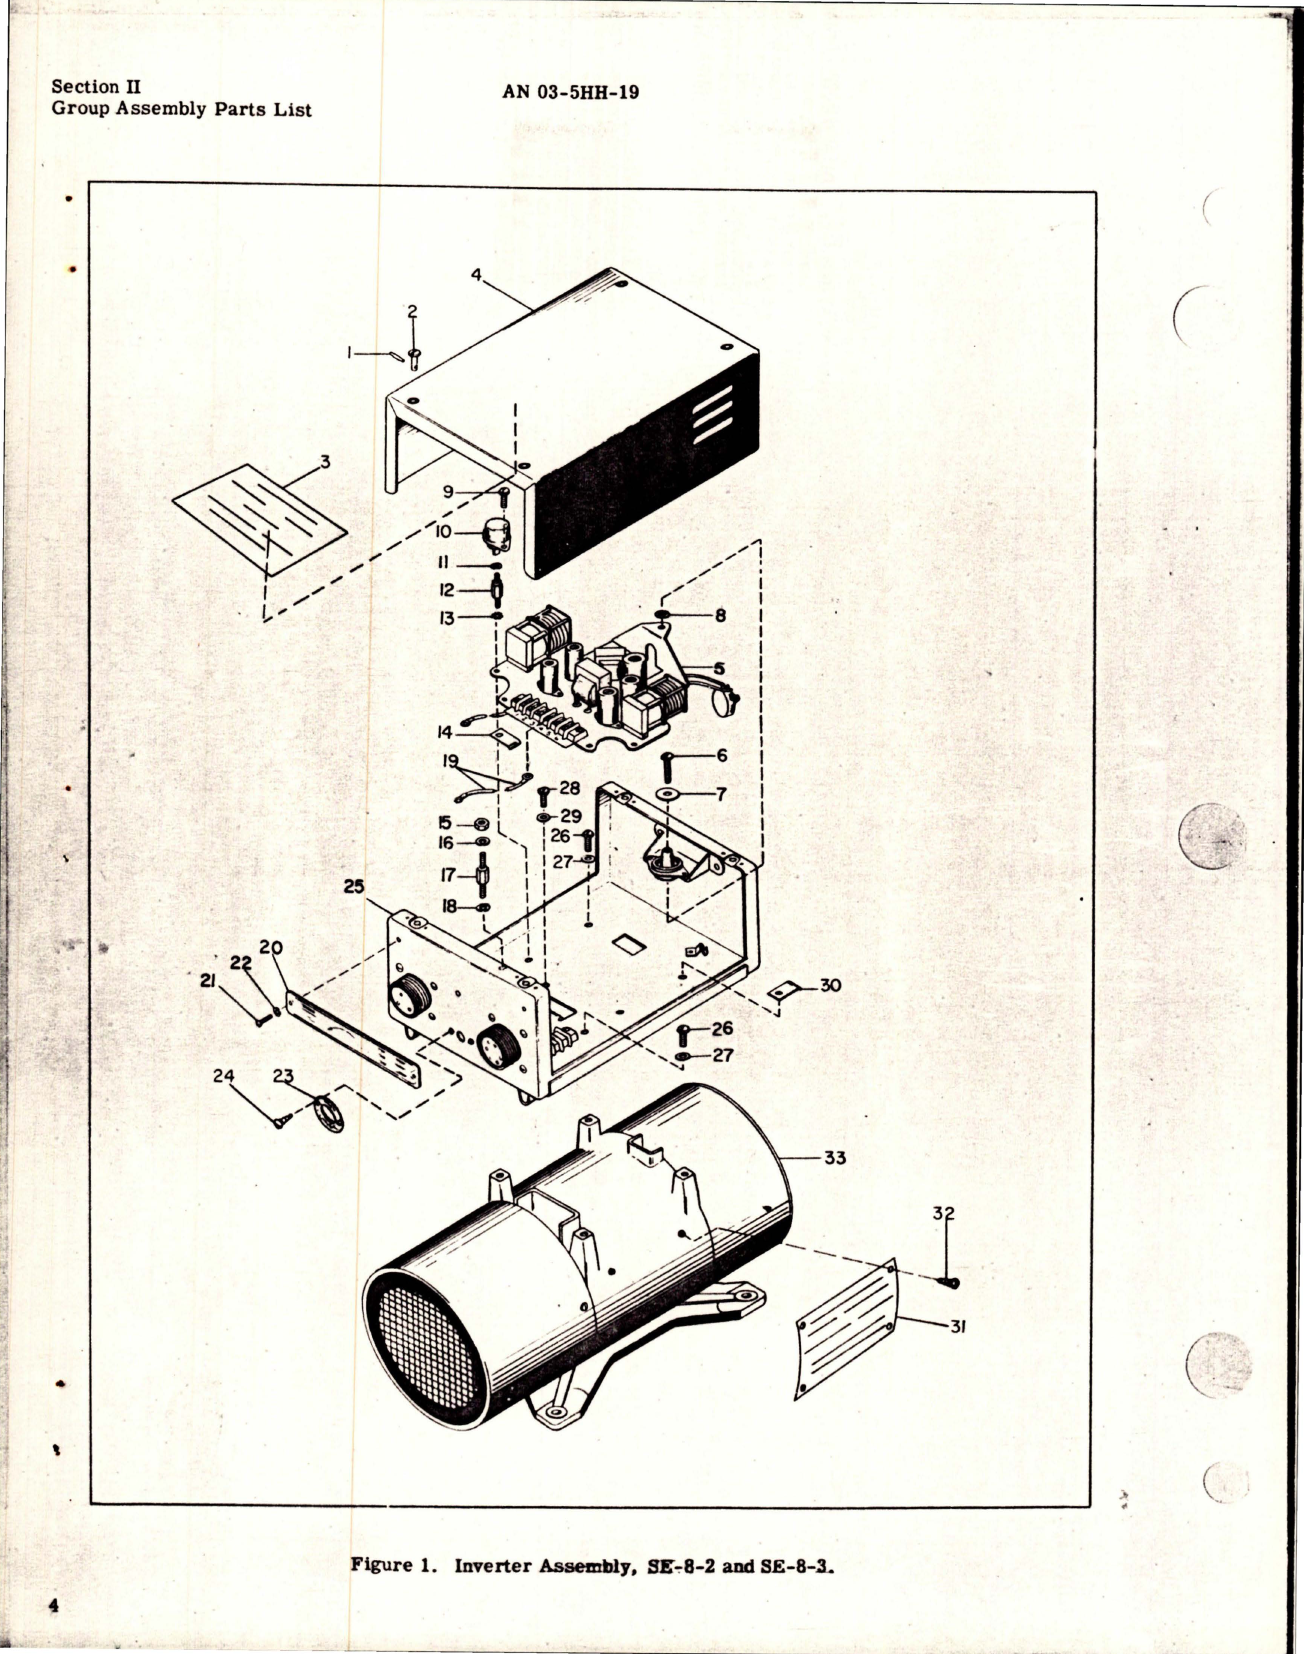 Sample page 7 from AirCorps Library document: Illustrated Parts Breakdown for Inverter - Parts SE-8-2 and SE-8-3